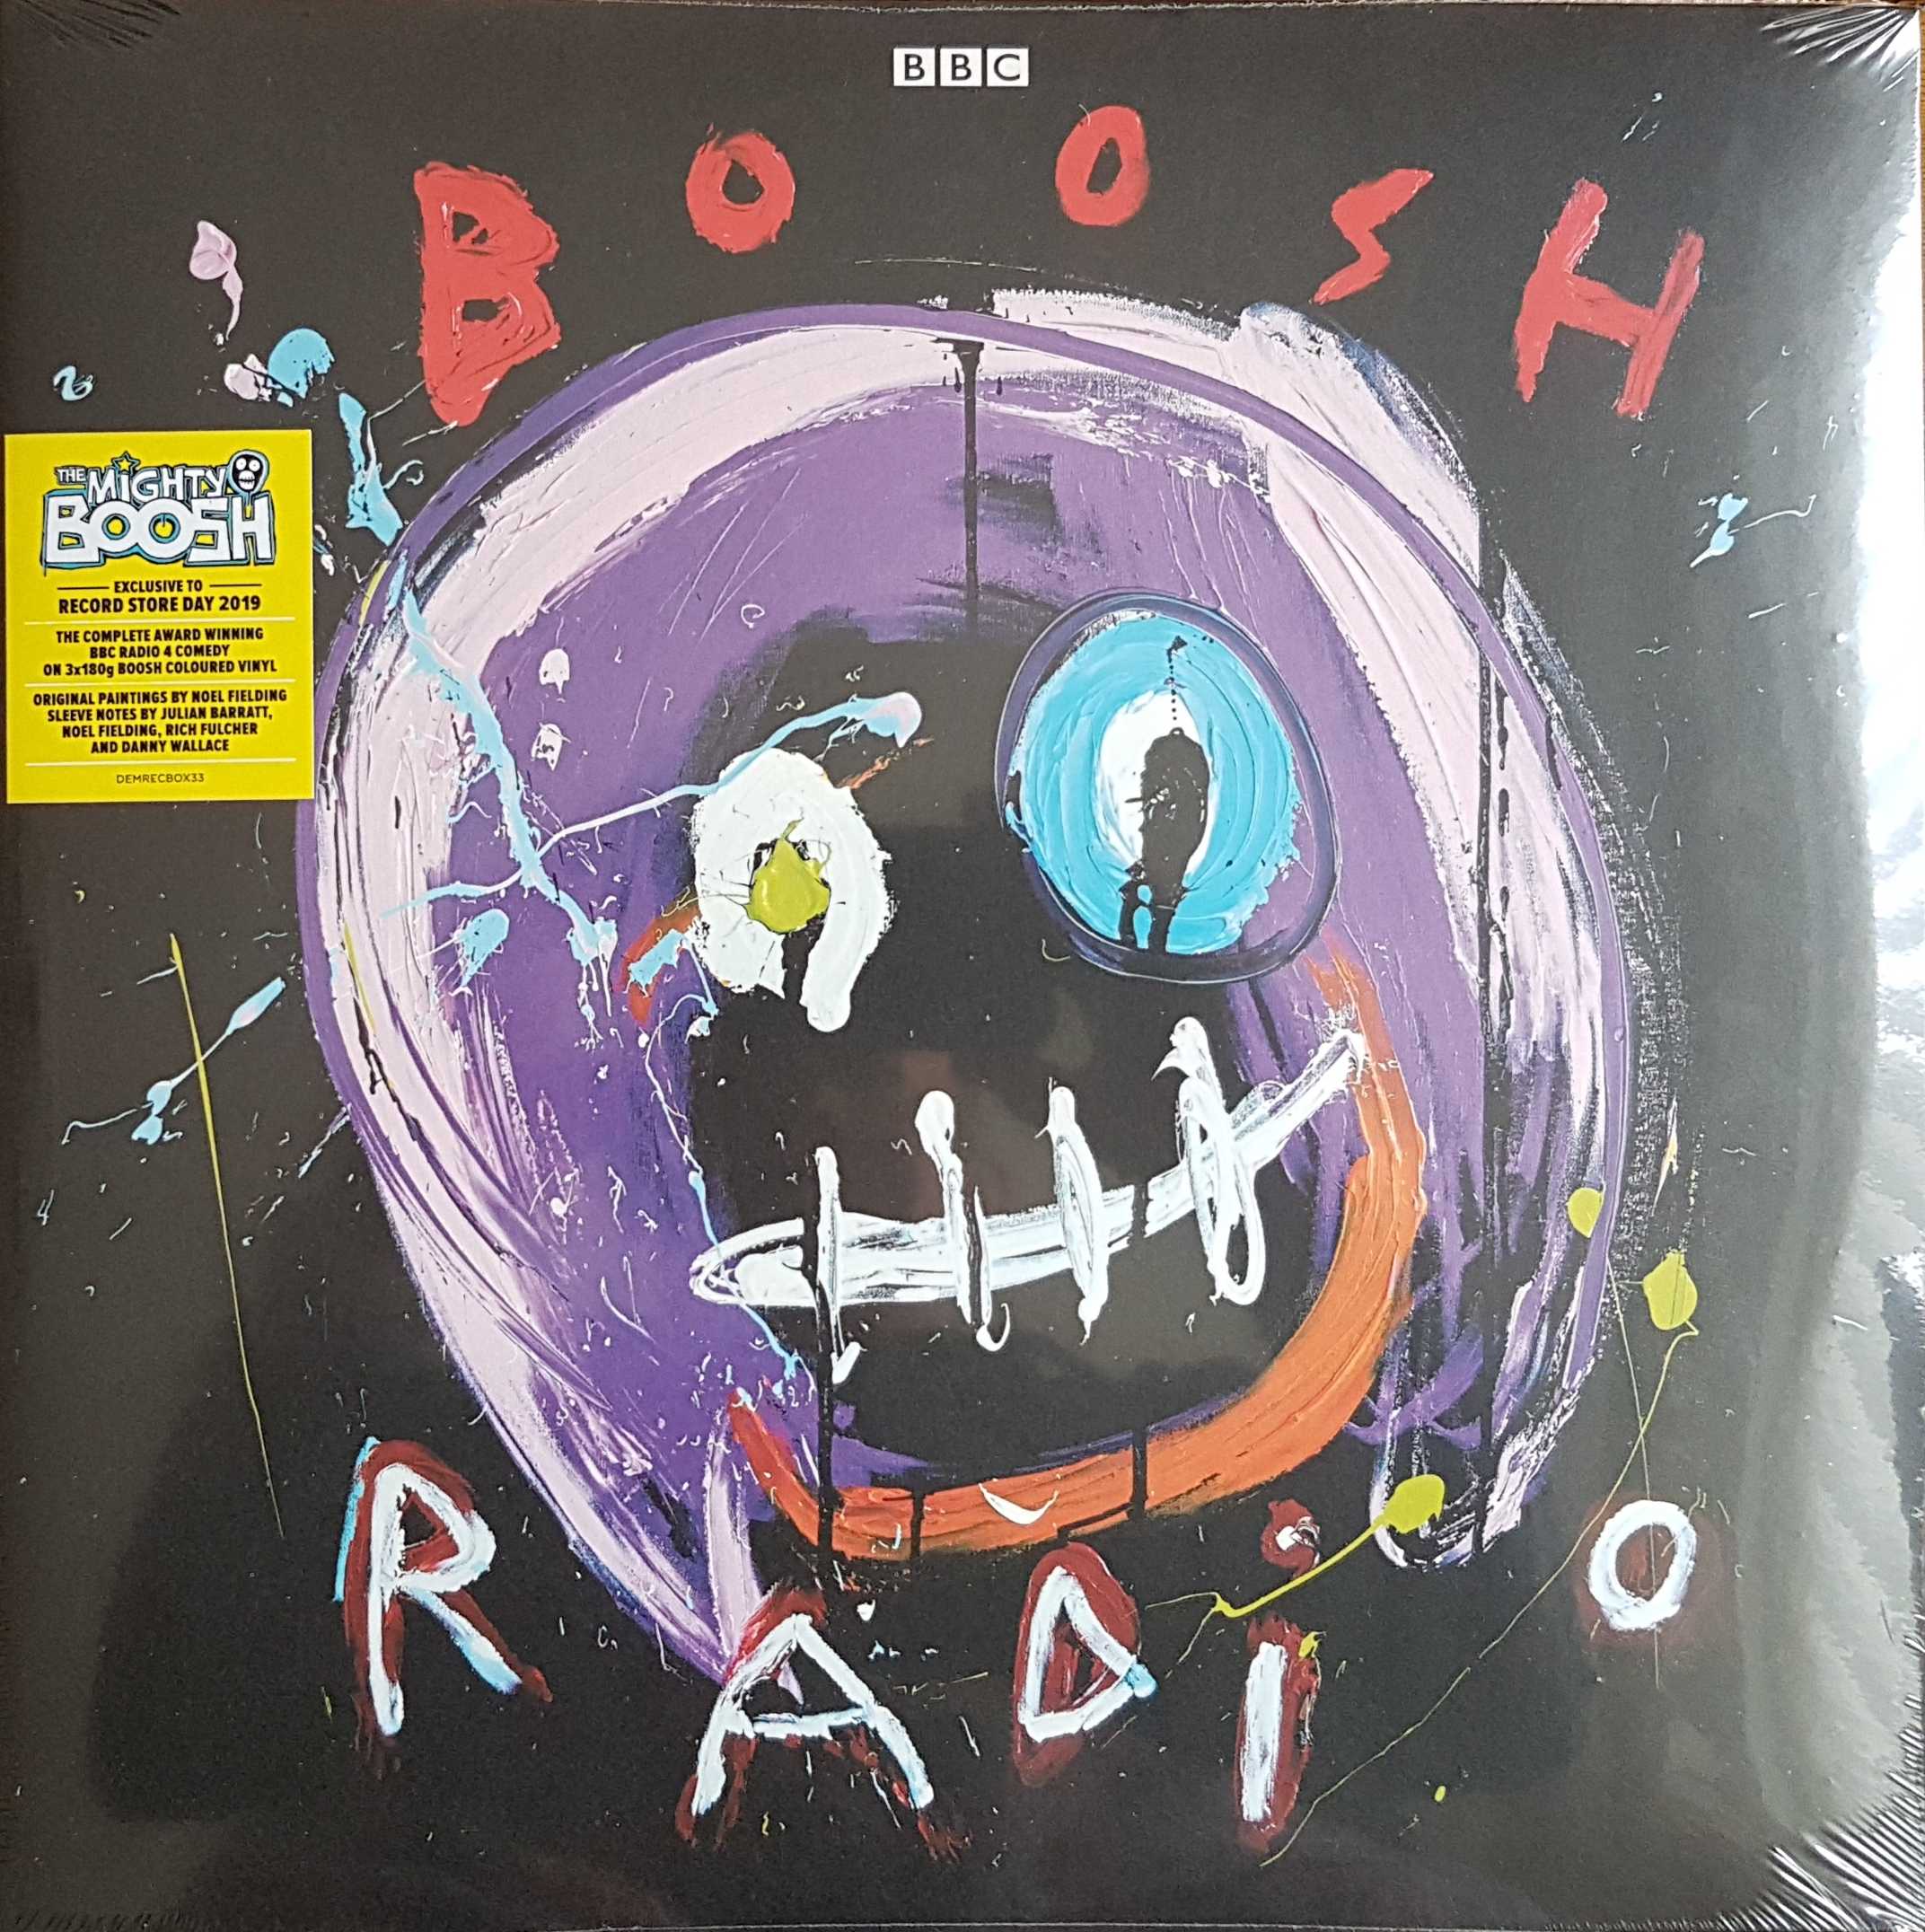 Picture of DEMRECBOX 33 The complete Boosh radio series - Record Store Day 2019 by artist Julian Barratt / Noel Fielding from the BBC records and Tapes library